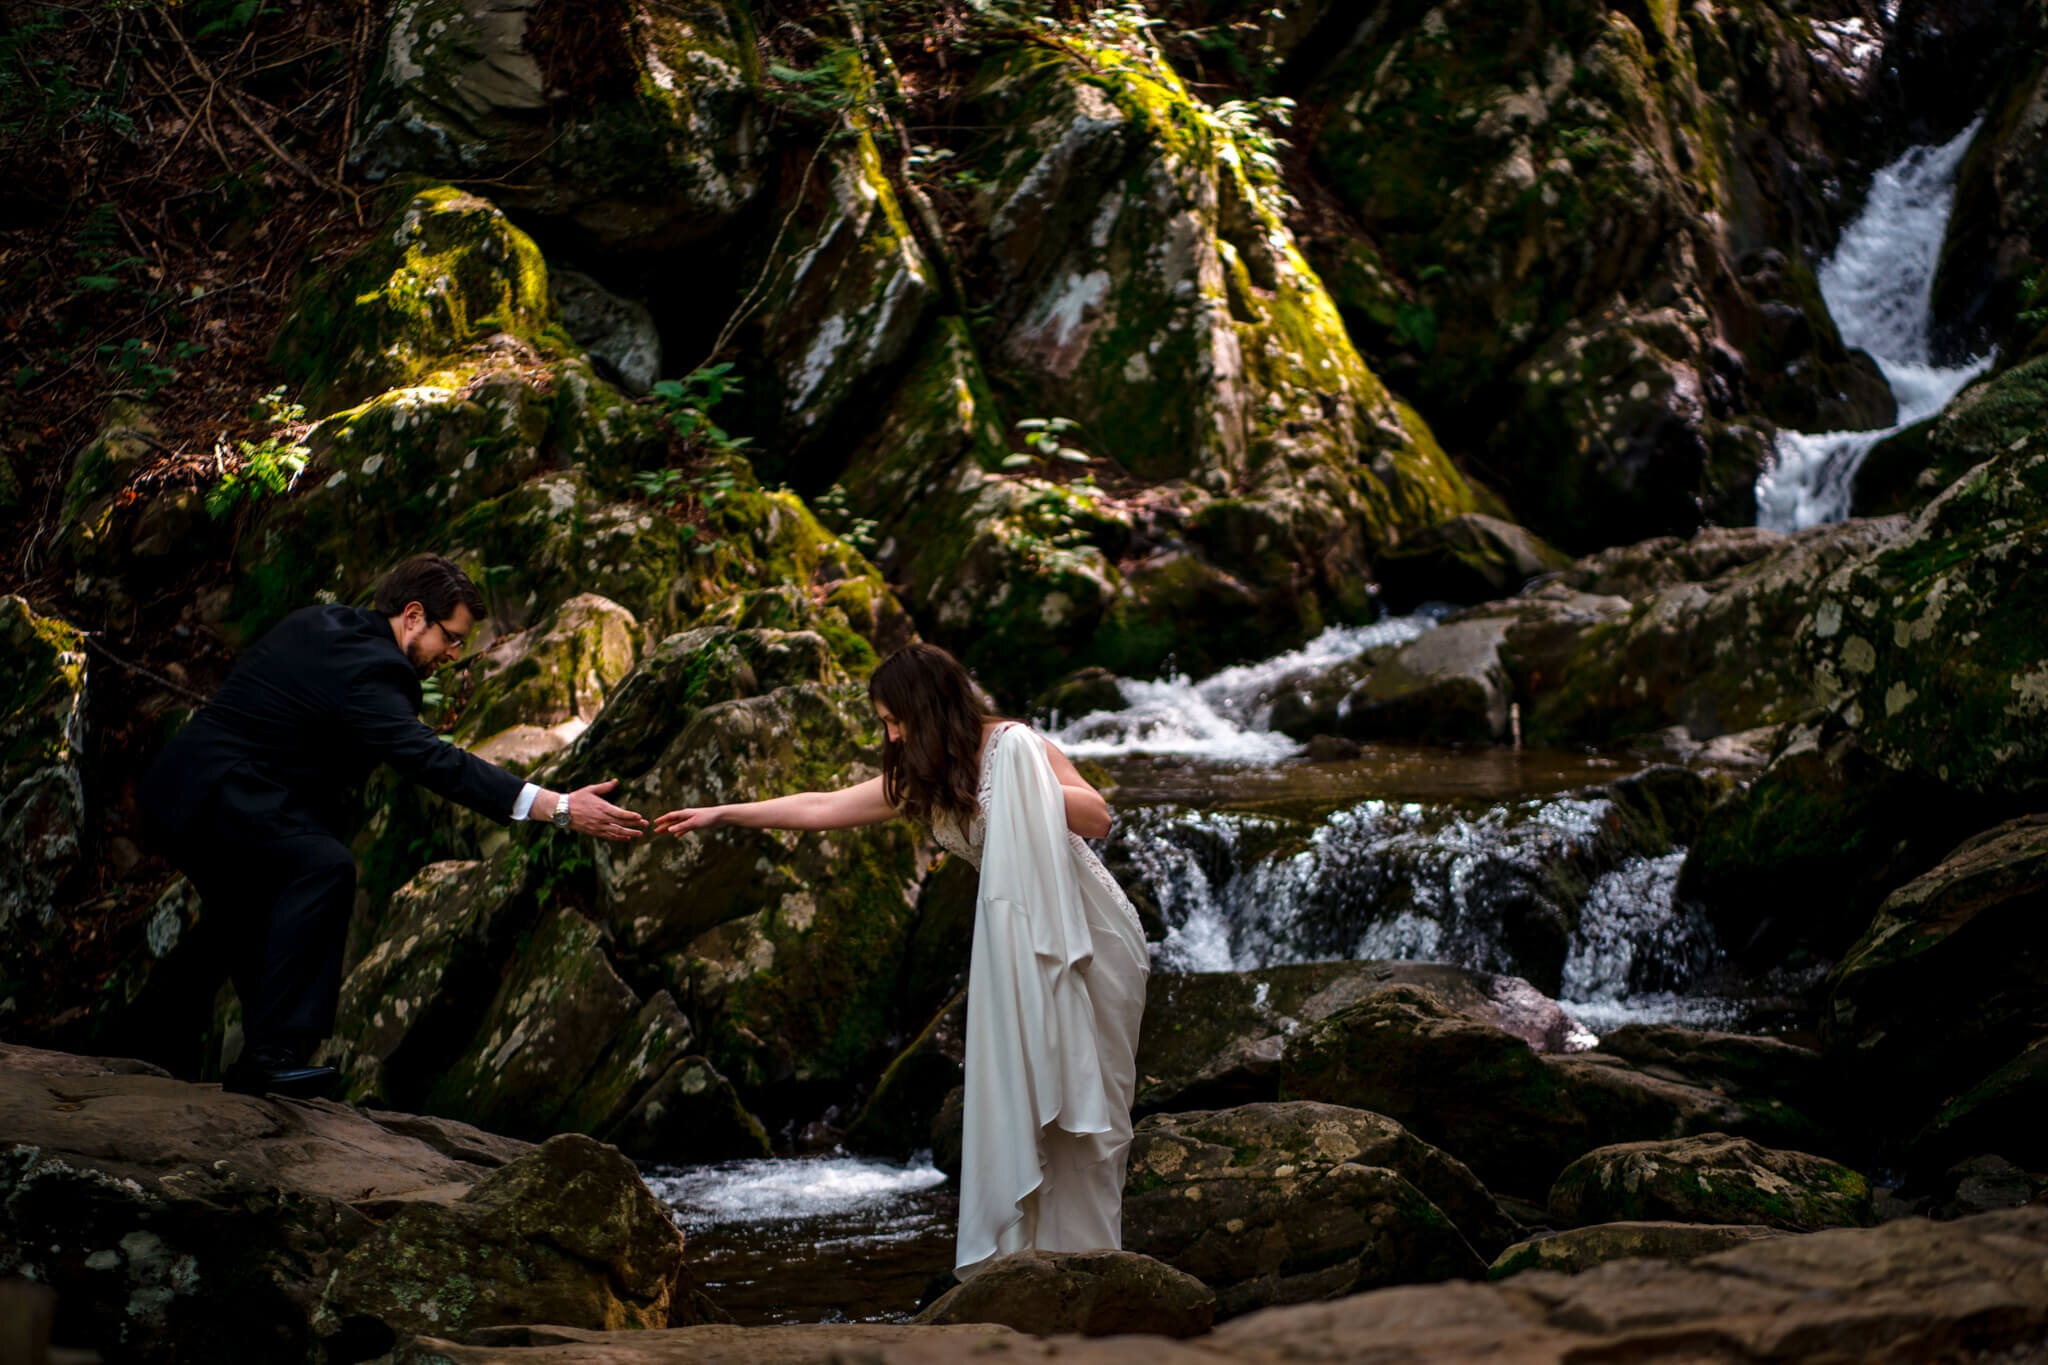 Dark-Hollow-Falls-Point-Overlook-Shenandoah-Adventure-Wedding-Portrait-Session-Photography-by-Bee-Two-Sweet-26.jpg